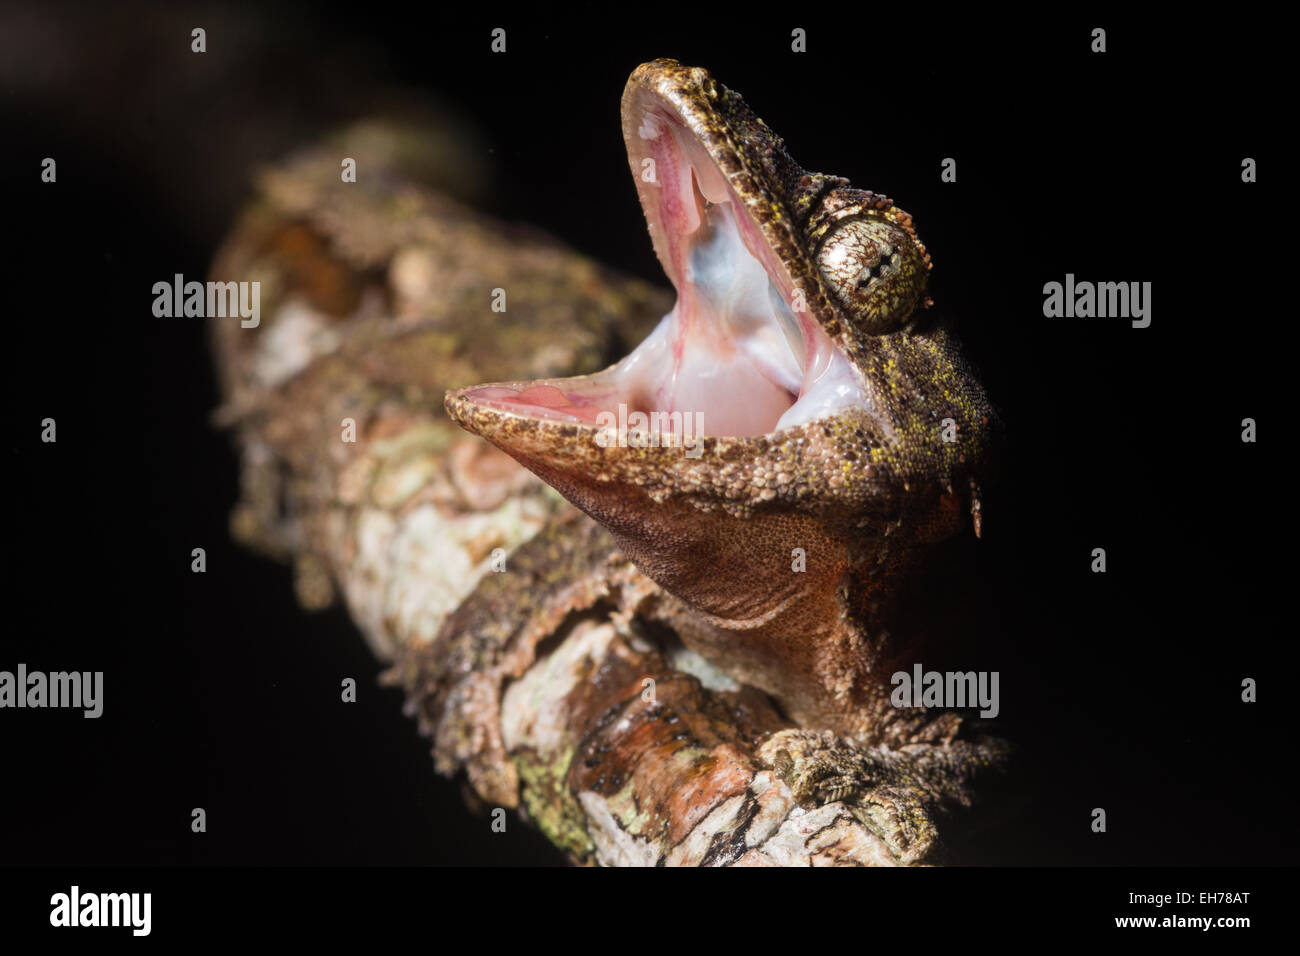 A kinabalu parachute gecko (Ptychozoon rhacophorus) from the montane forest of Kinabalu National Park. Stock Photo